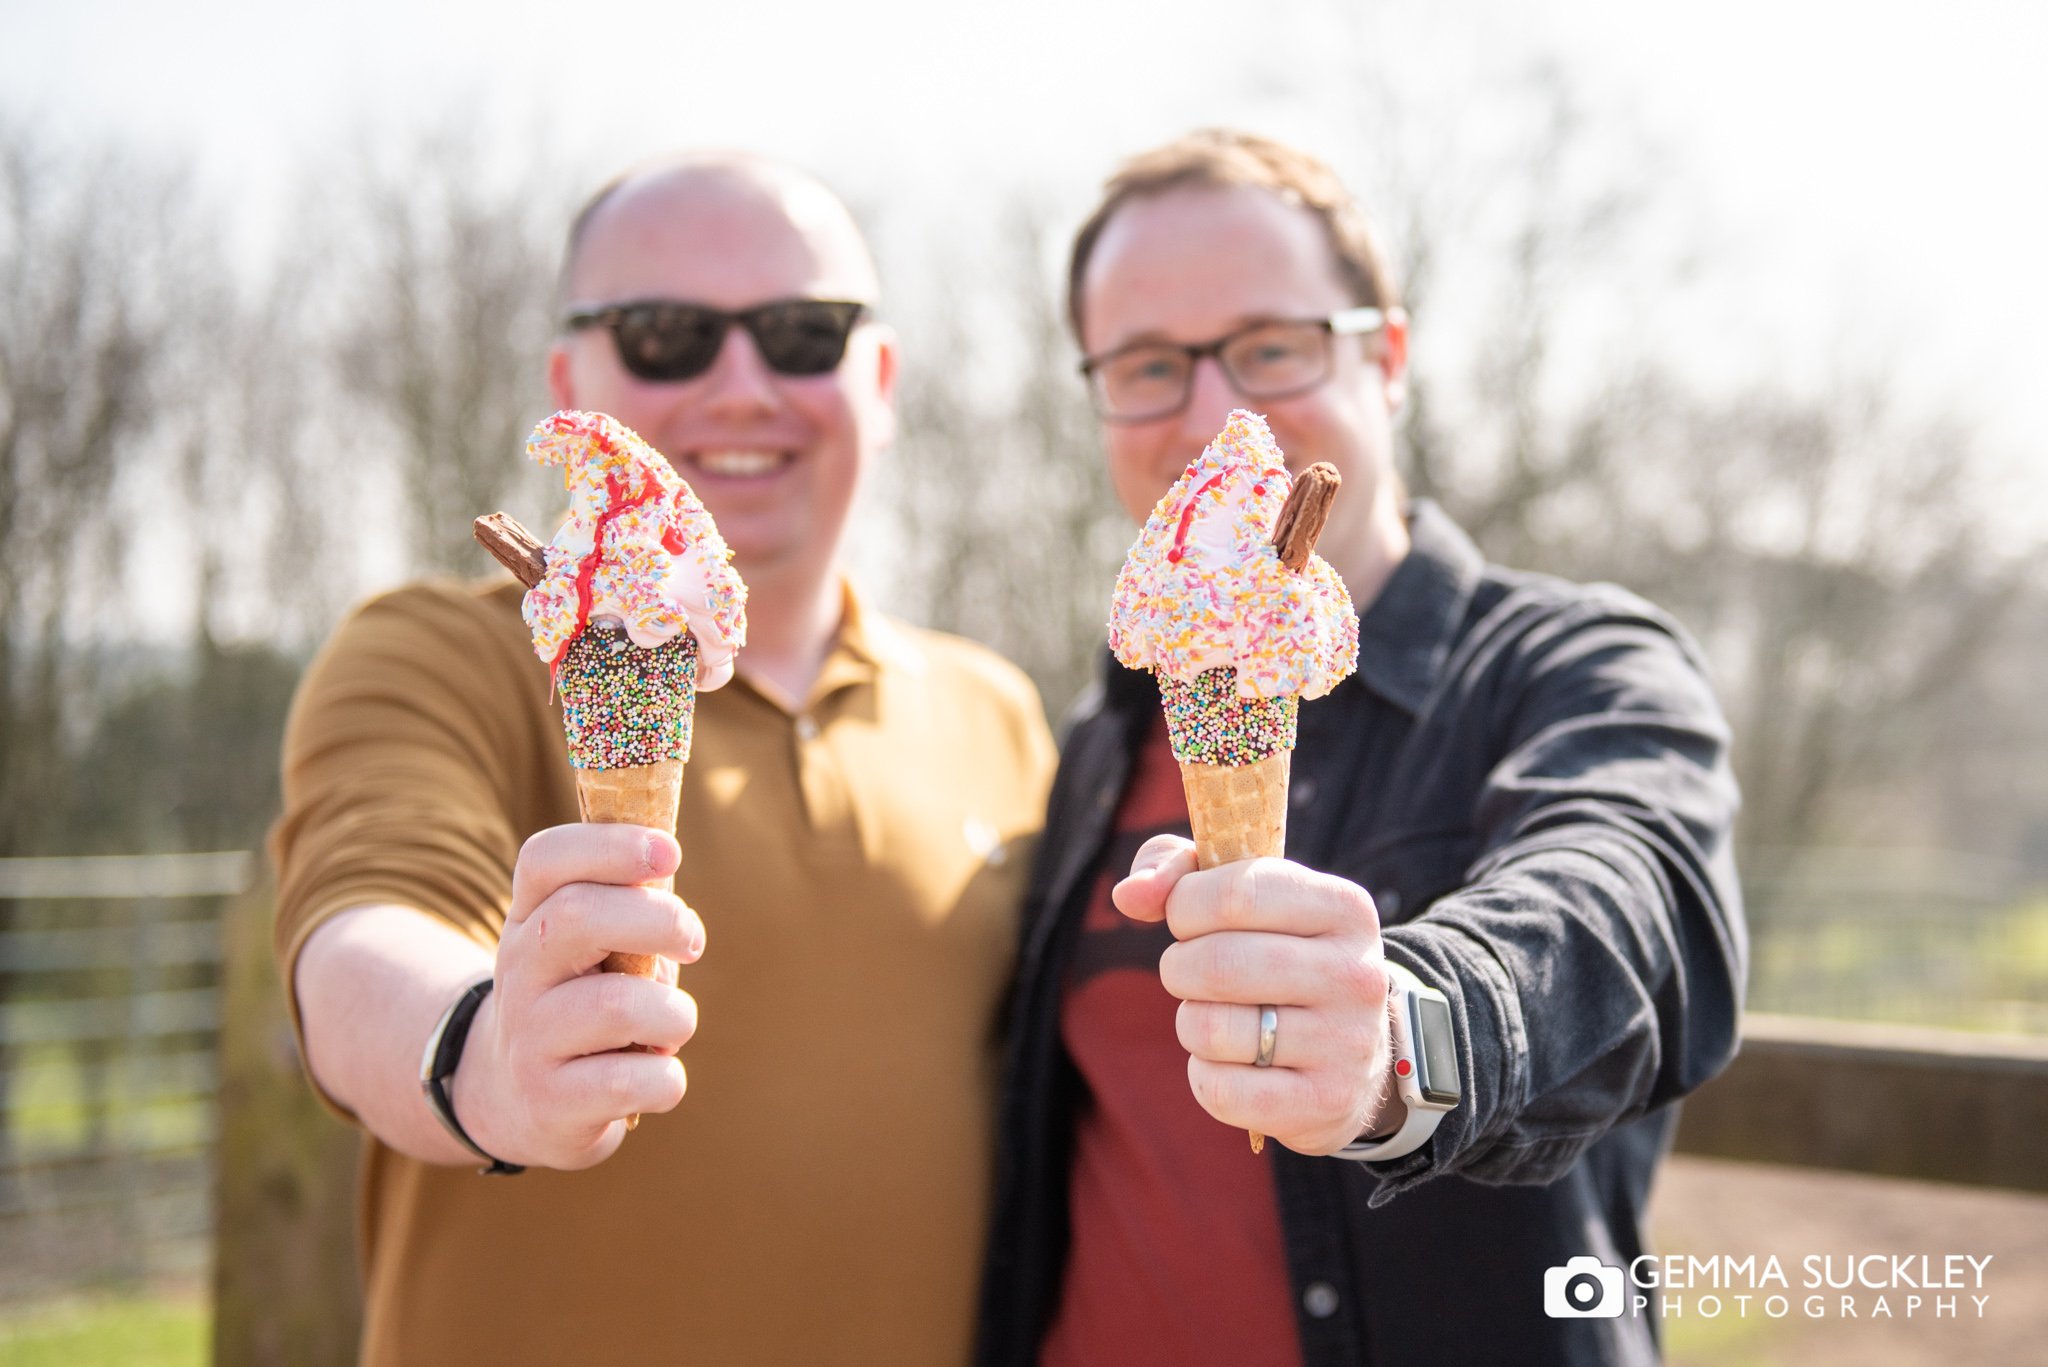 A couple holding out ice creams at temple newsam